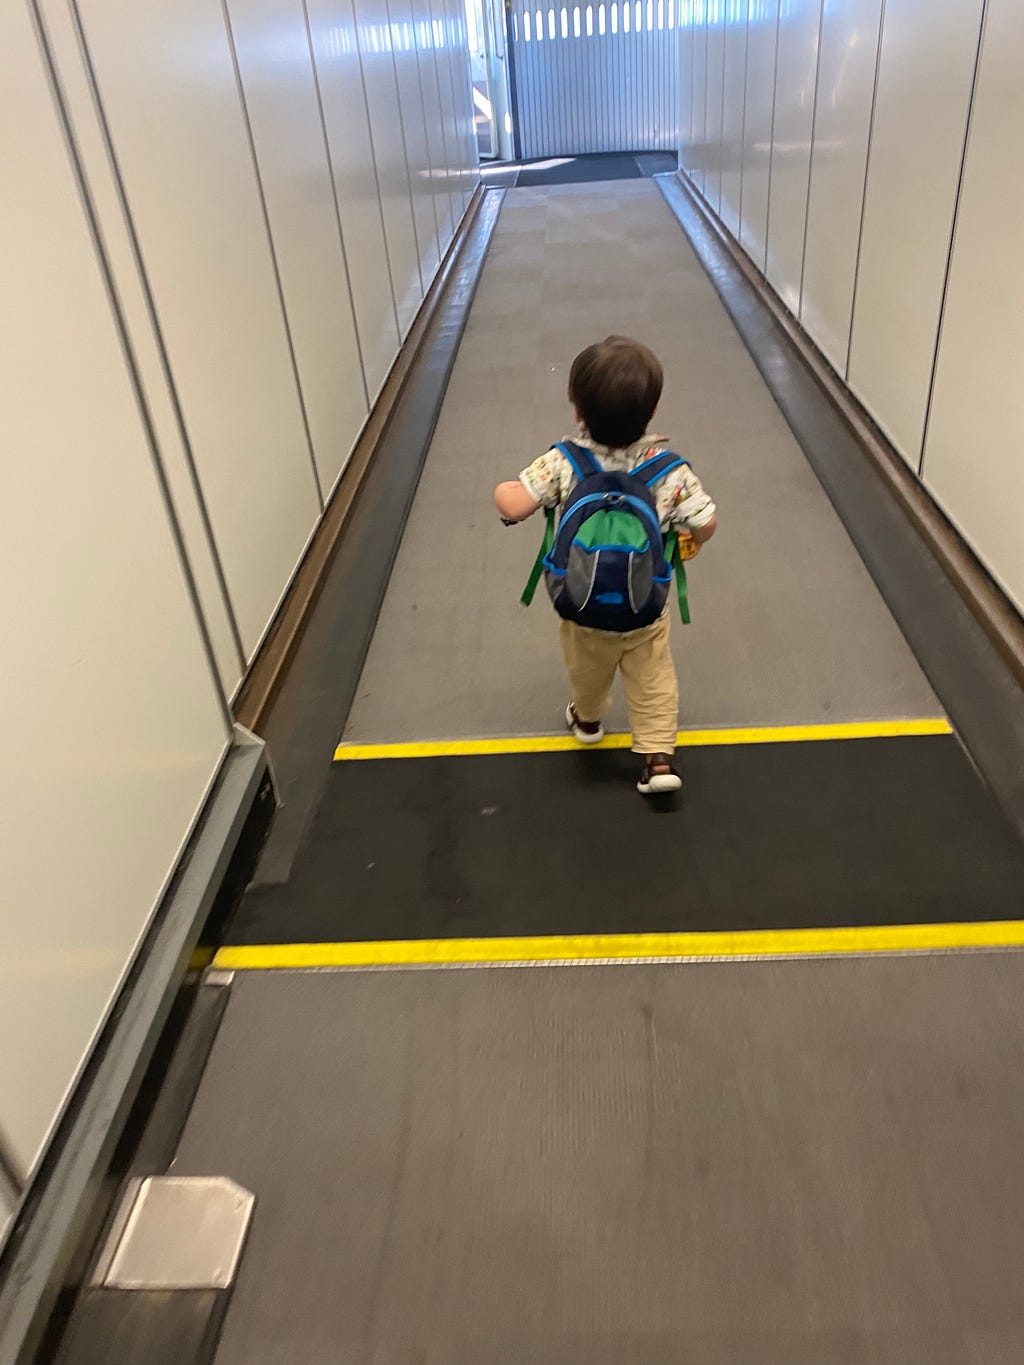 A small child seen from the back carrying a small backpack walking confidently down an airplain boarding ramp.